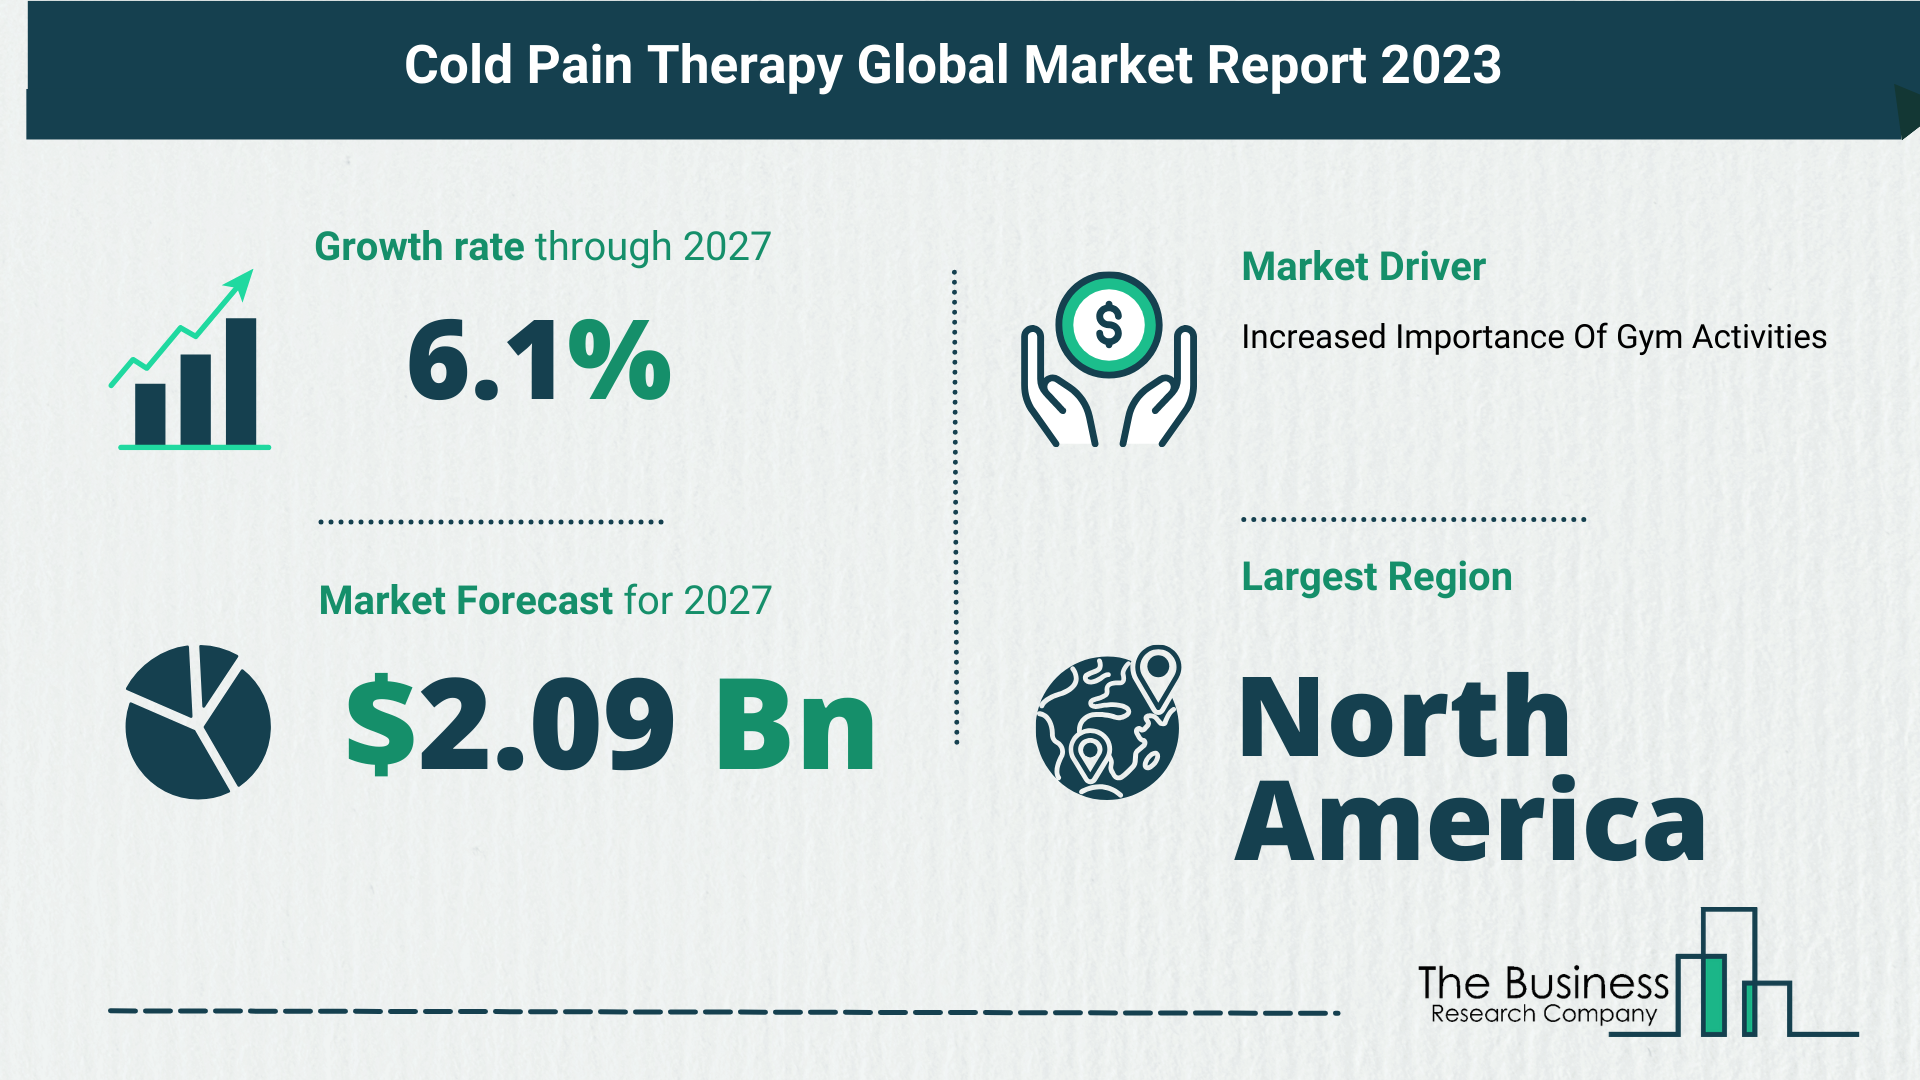 Top 5 Insights From The Cold Pain Therapy Market Report 2023